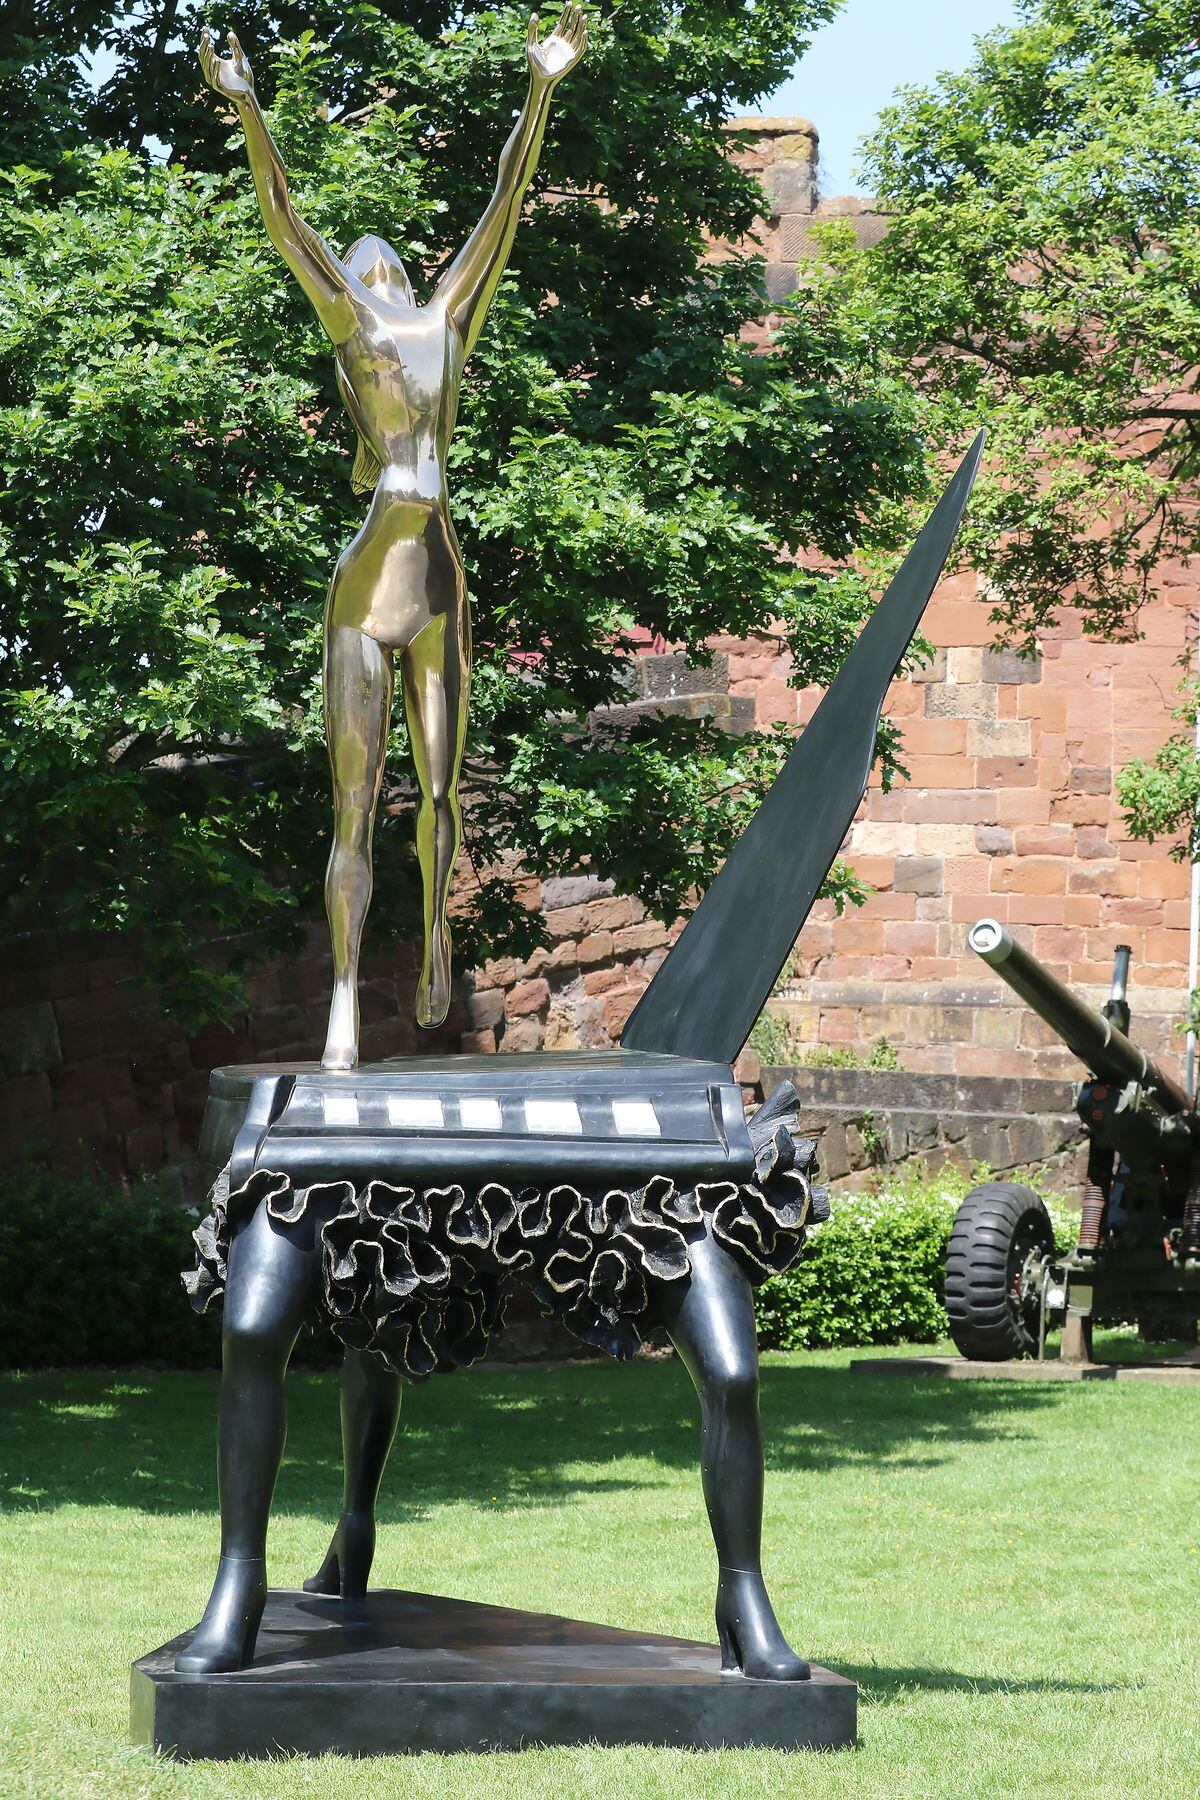 Shrewsbury Arts Trail has been launched. From Thursday, June 1 until August 31 visitors can enjoy the Sculpture Trail in Shrewsbury. Salvador Dali and Jacob Chandler, Shrewsbury Castle, Shrewsbury Museum and Art Gallery and The Dingle at Quarry Park.